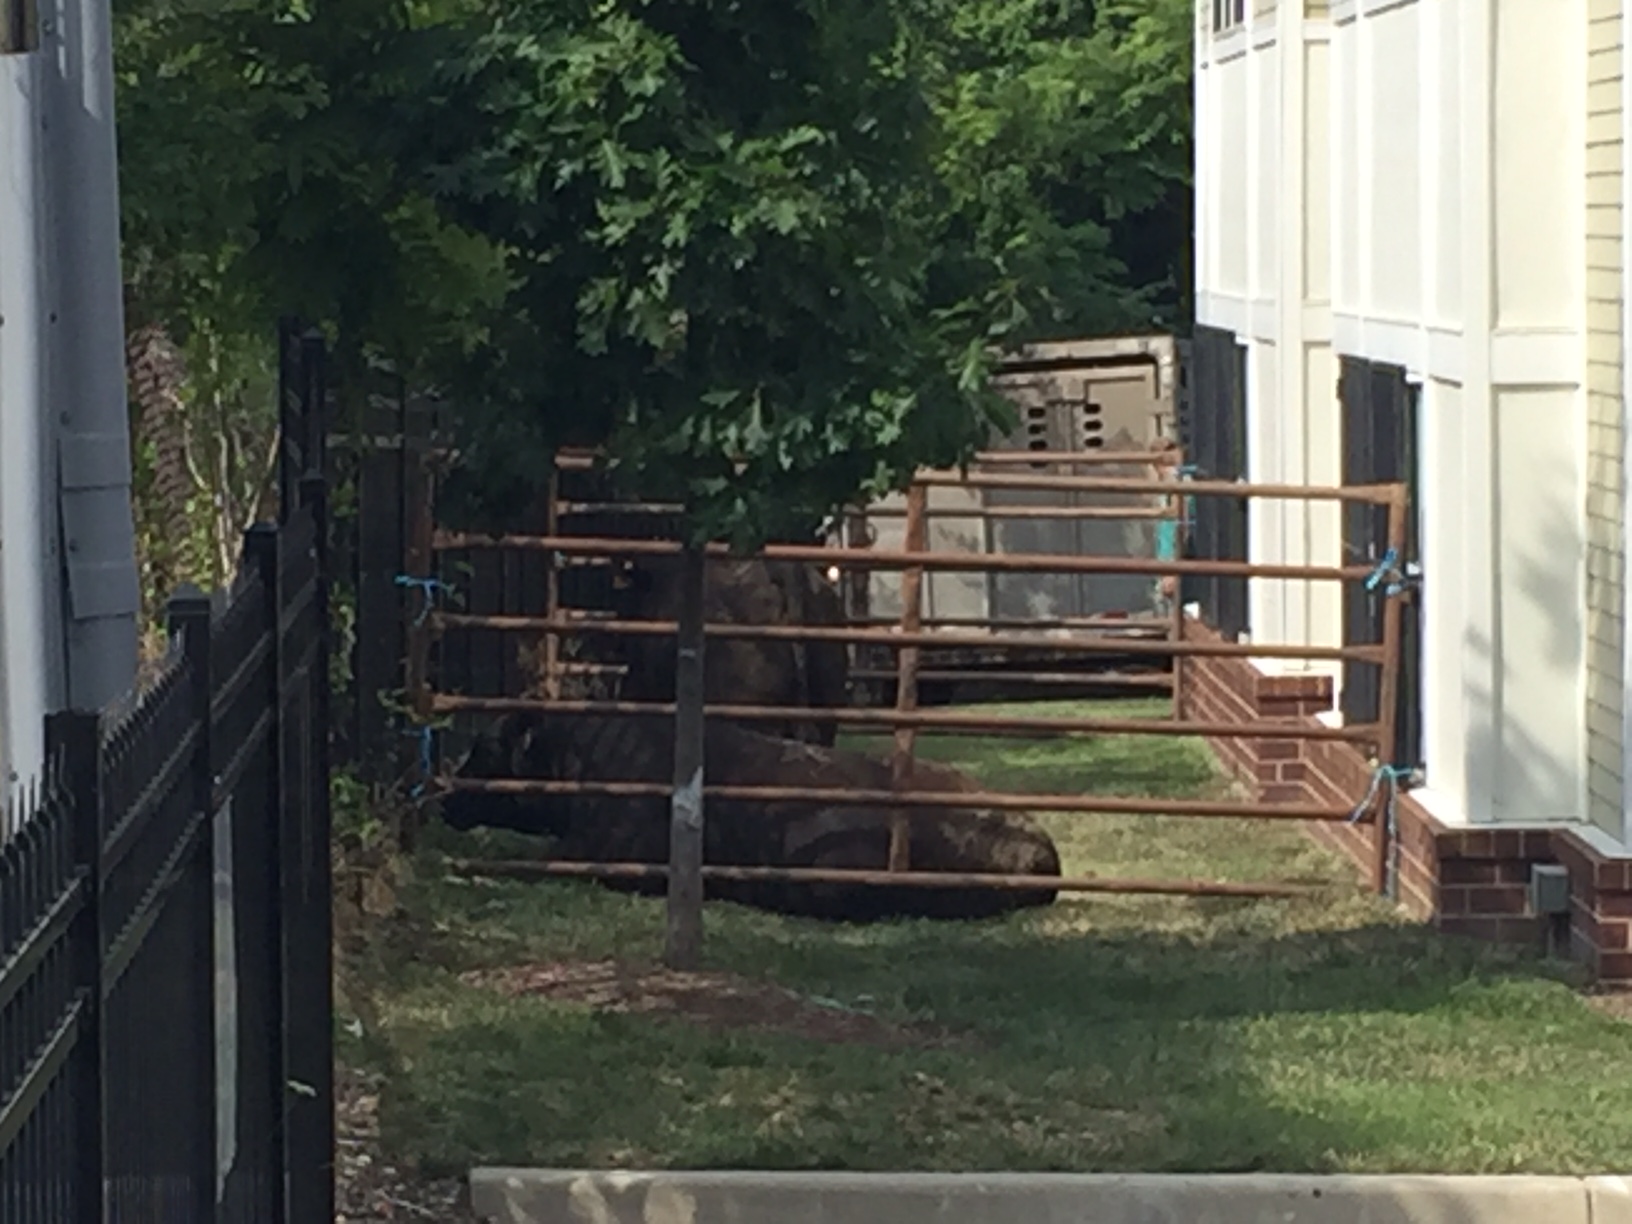 The bulls ran to a nearby apartment complex, grazing on a patch of grass next to residences. (WTOP/Dennis Foley)